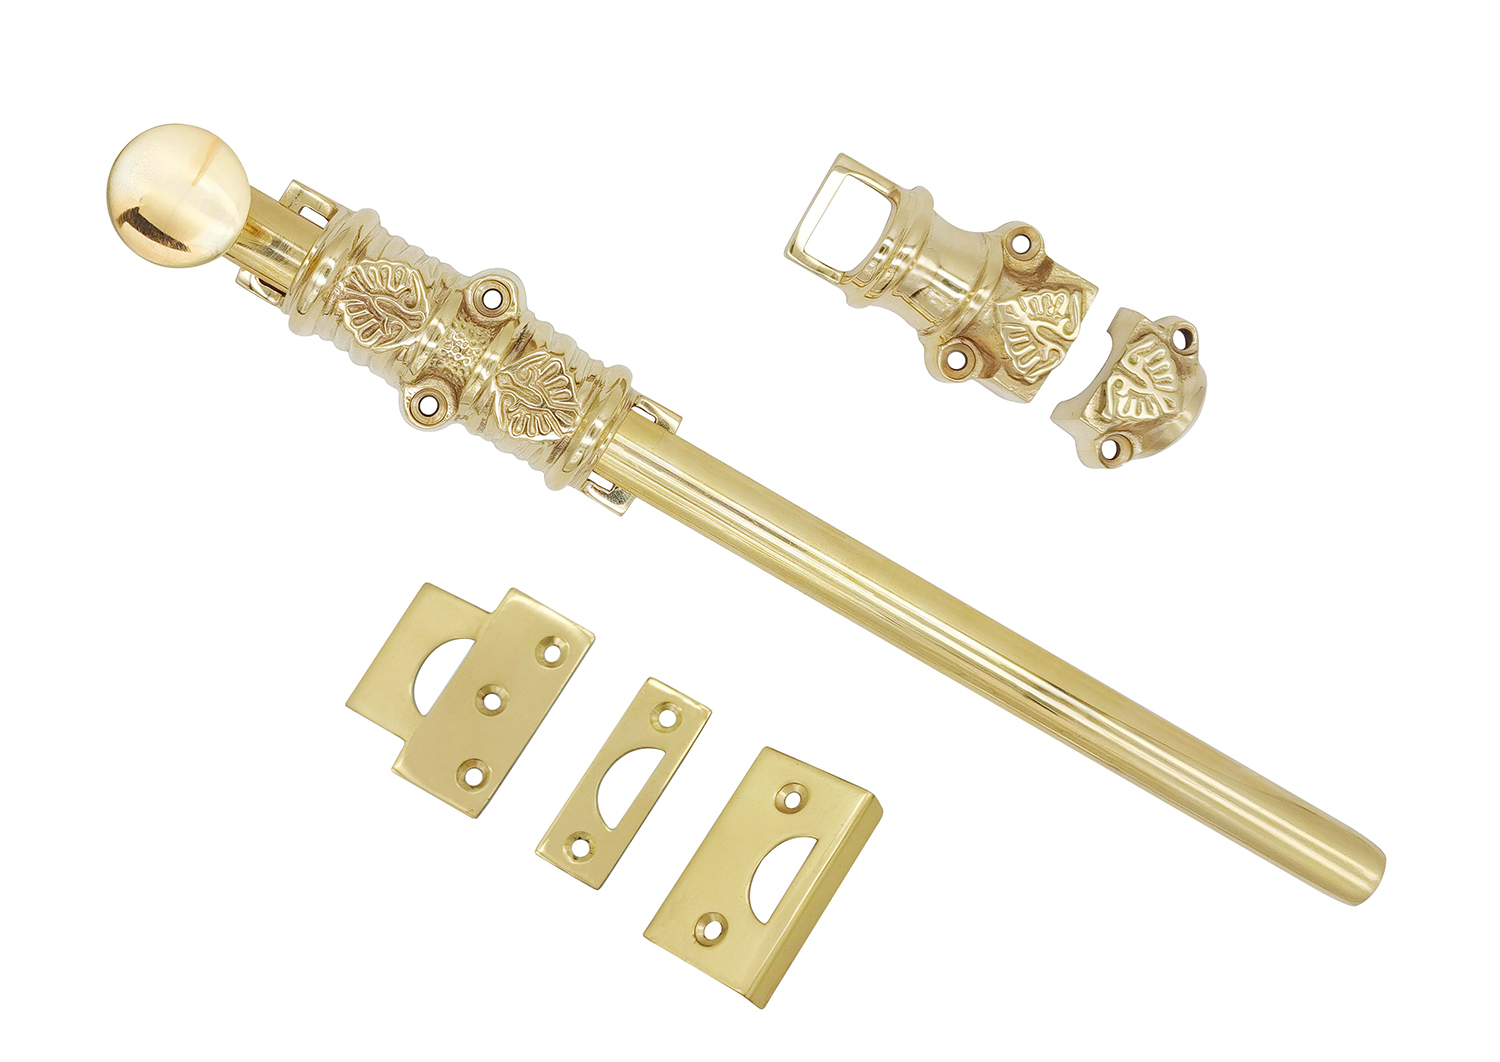 Matching To Cremone Bolt : Solid Brass Floral Polished Lacquered Surface Sliding Bolt 12 Inches